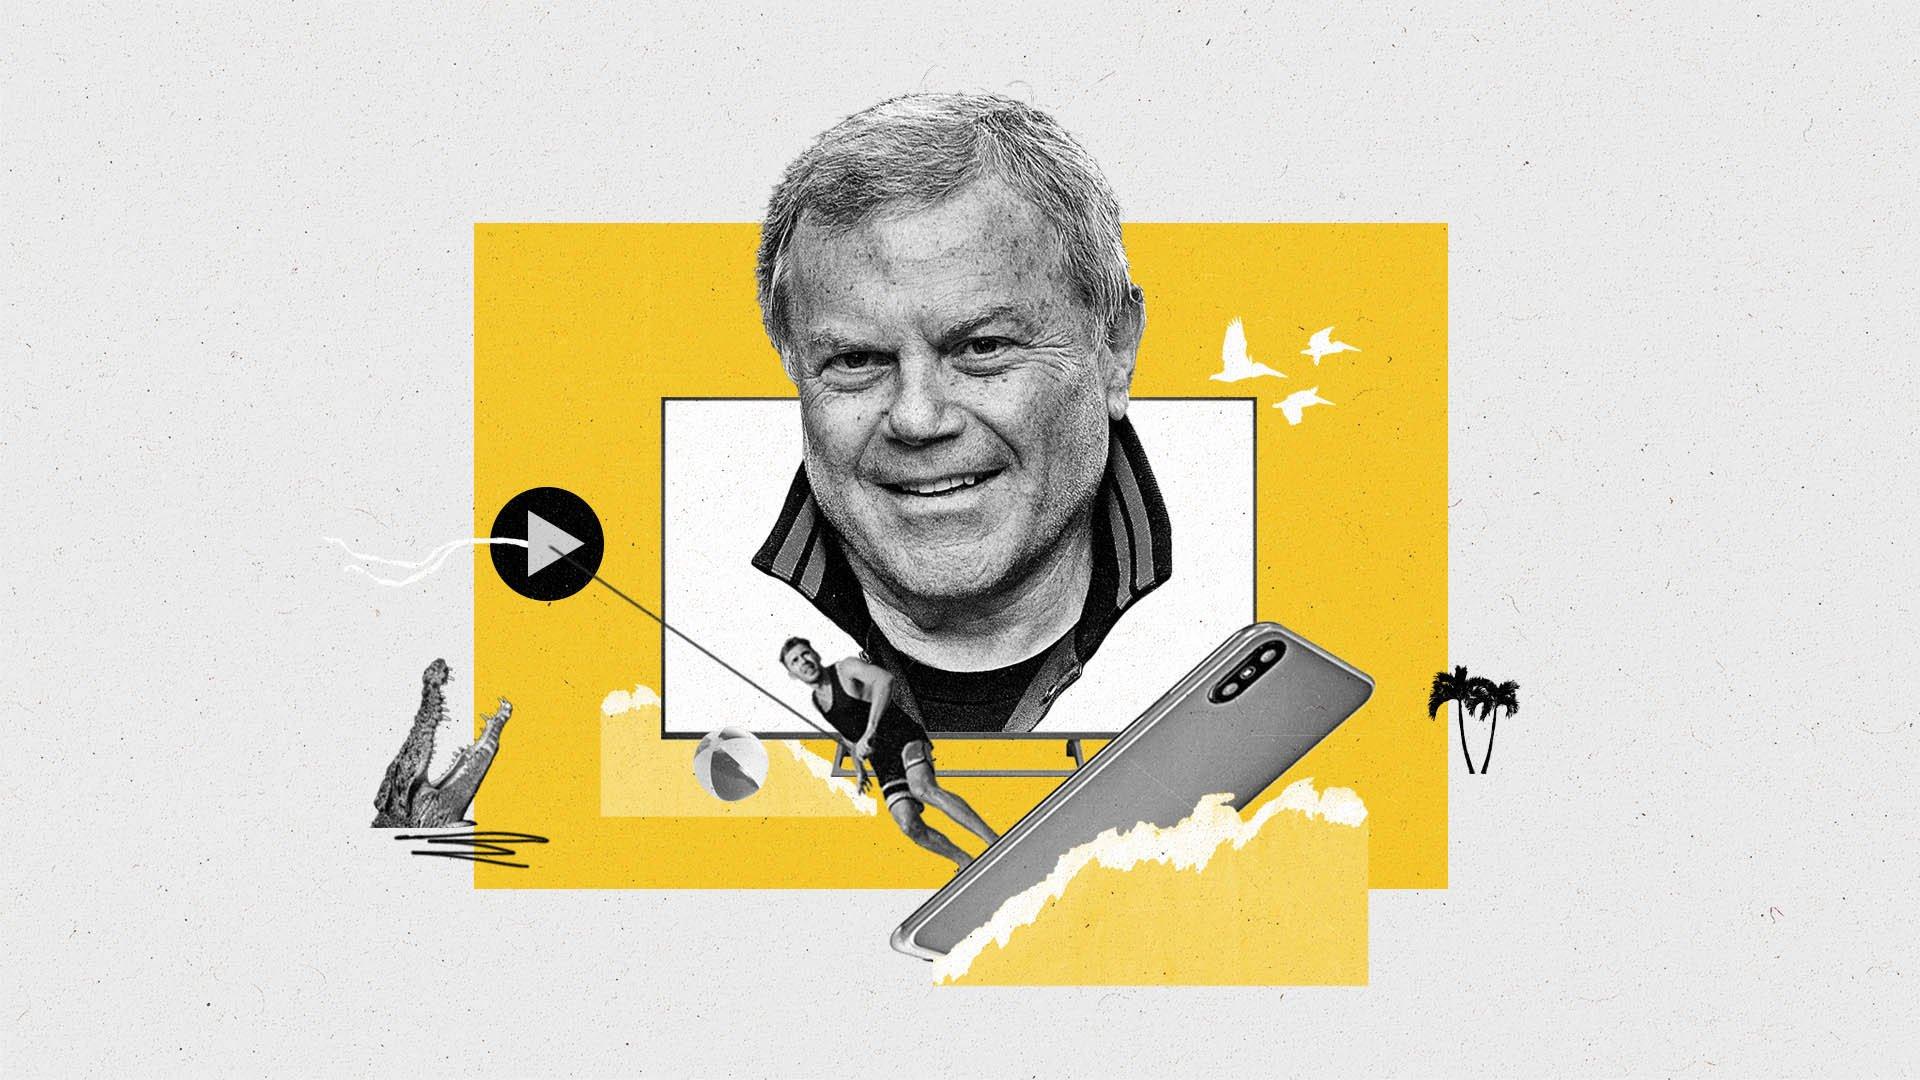 An image of Martin Sorrell on a connected TV sits above a man surfing a smartphone with a play button kite.